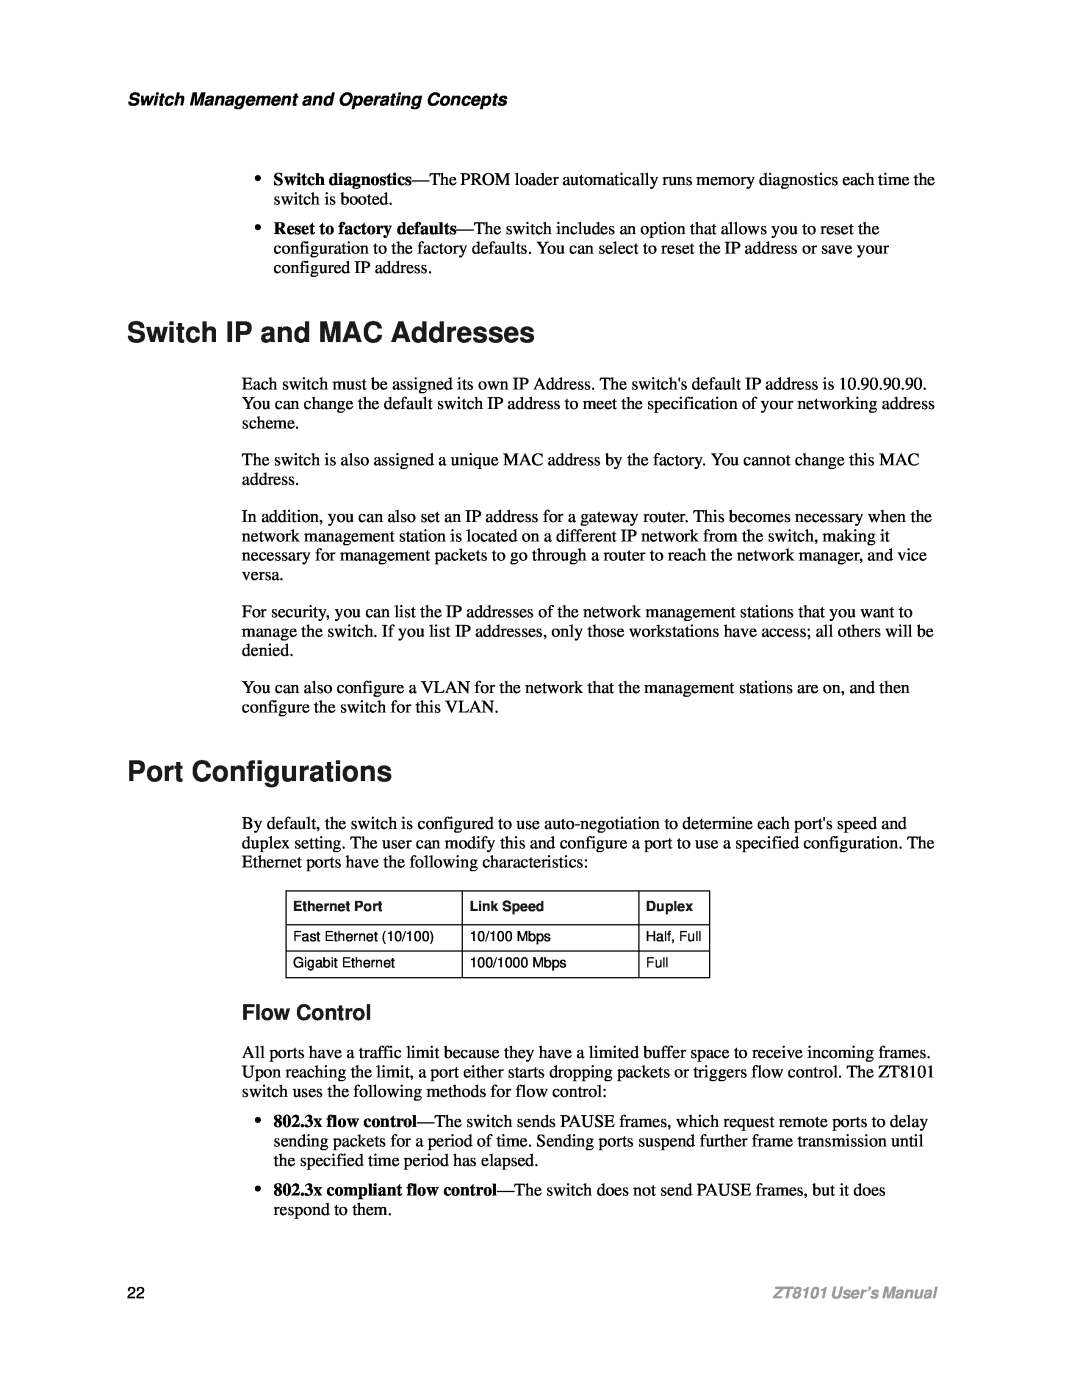 Intel ZT8101 Switch IP and MAC Addresses, Port Configurations, Flow Control, Switch Management and Operating Concepts 